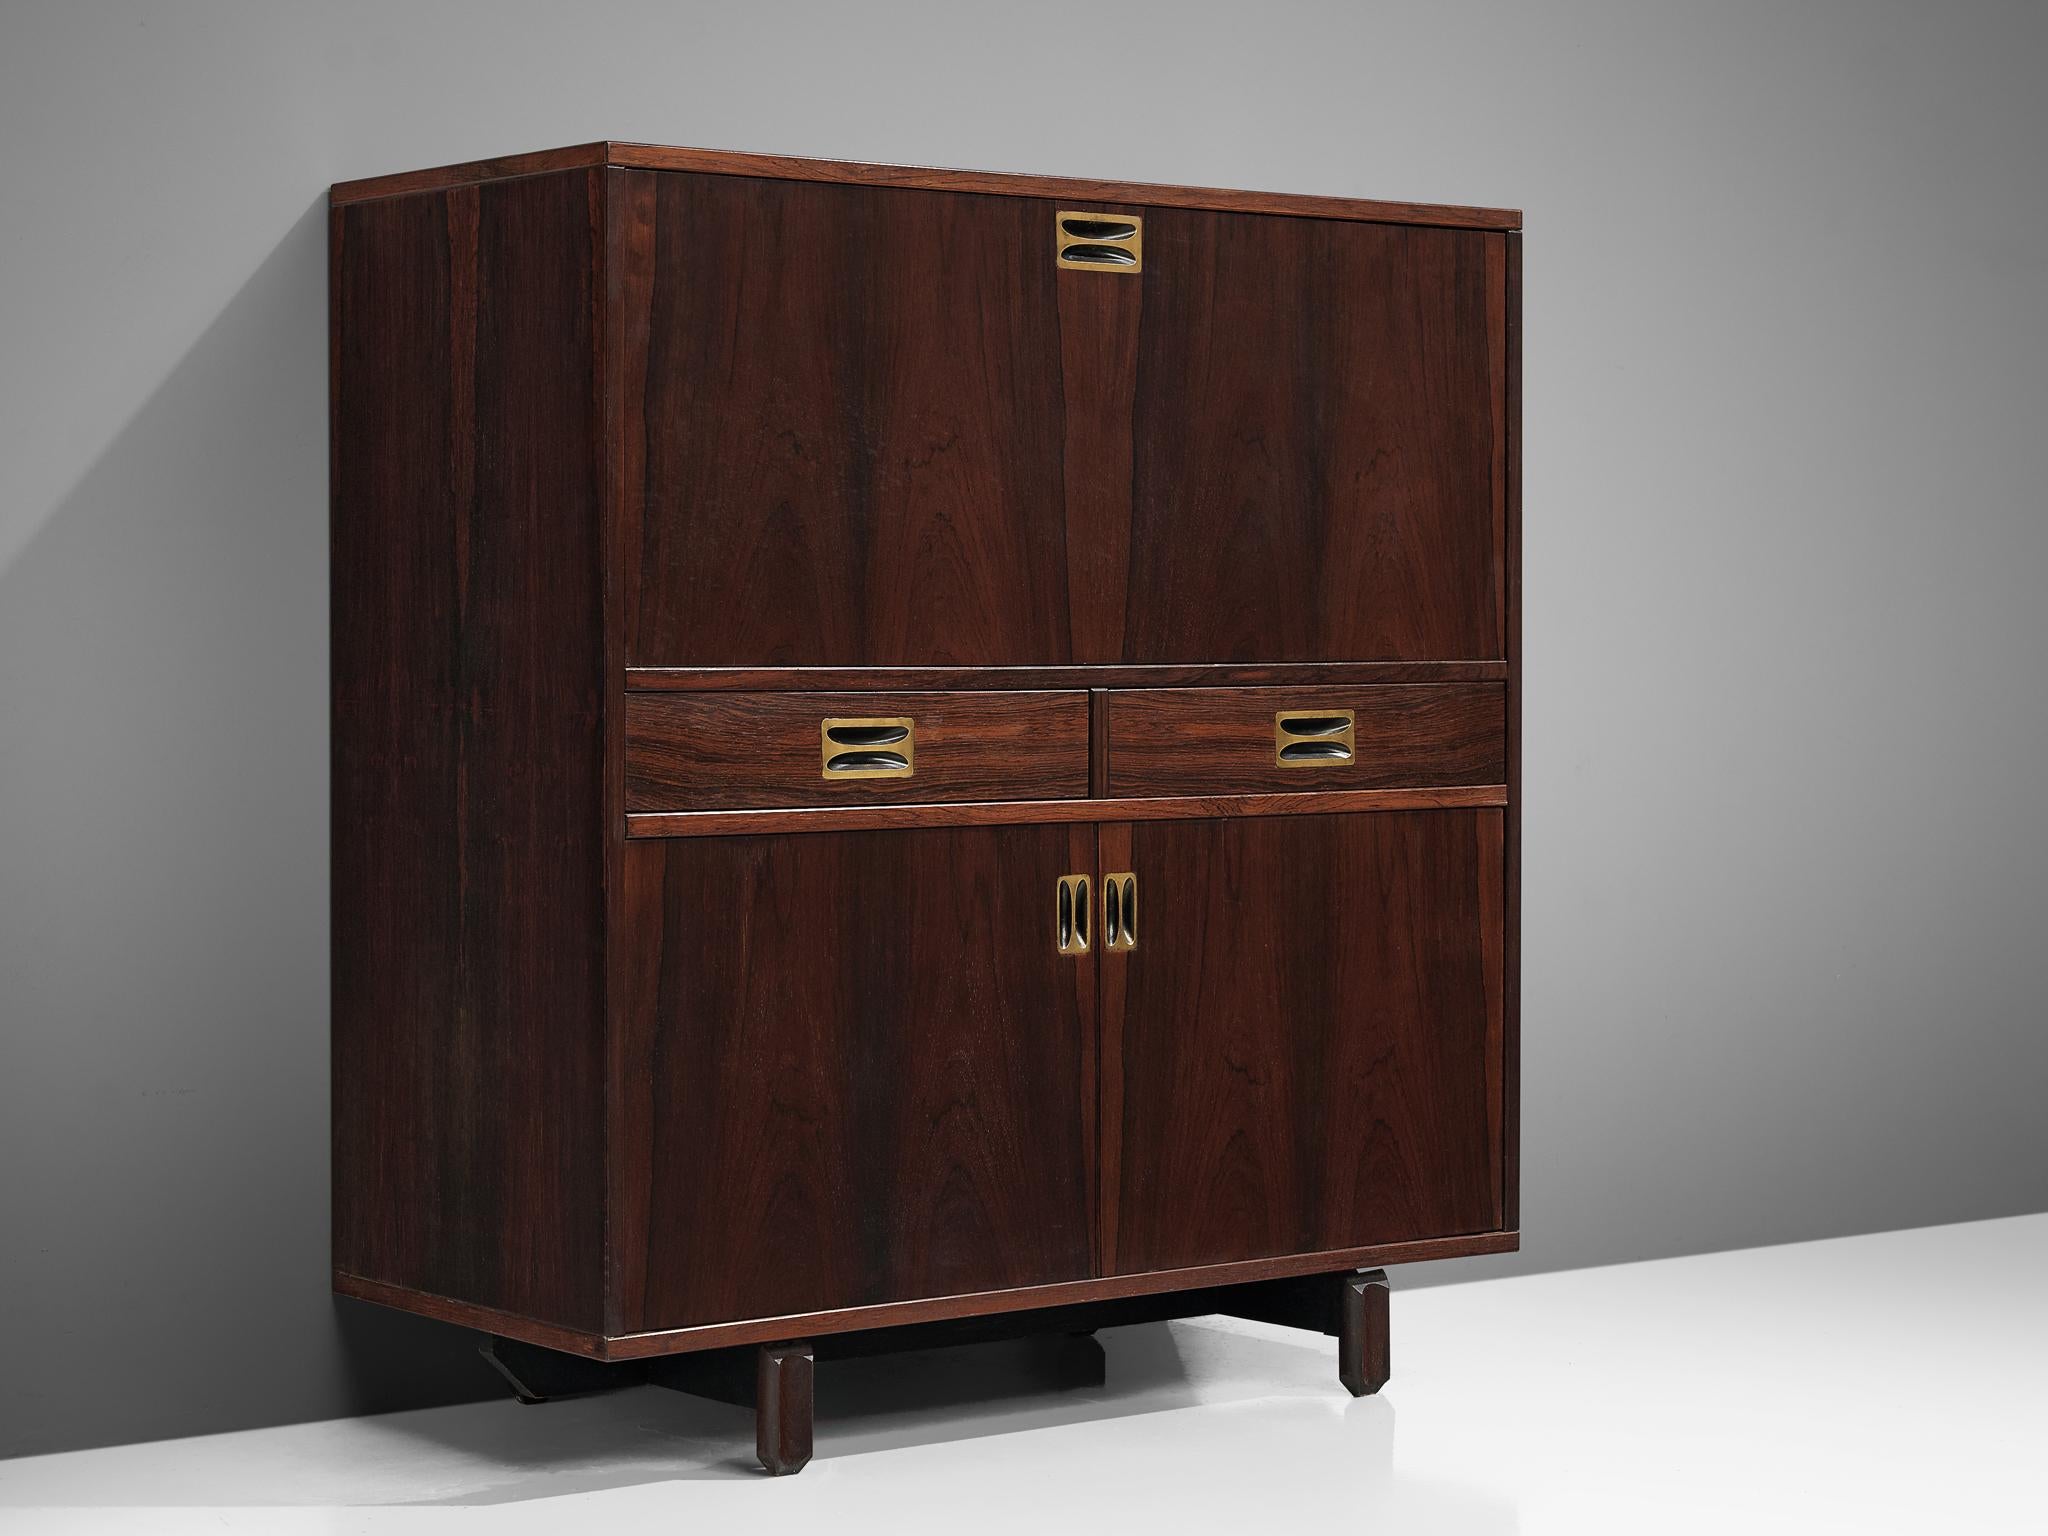 High sideboard, in rosewood and solid brass handles, Italy, 1950s.

This exquisitely finished cabinet is executed in rosewood. The high board features architectural features in the sense that it is built up of various blocks that form a unified